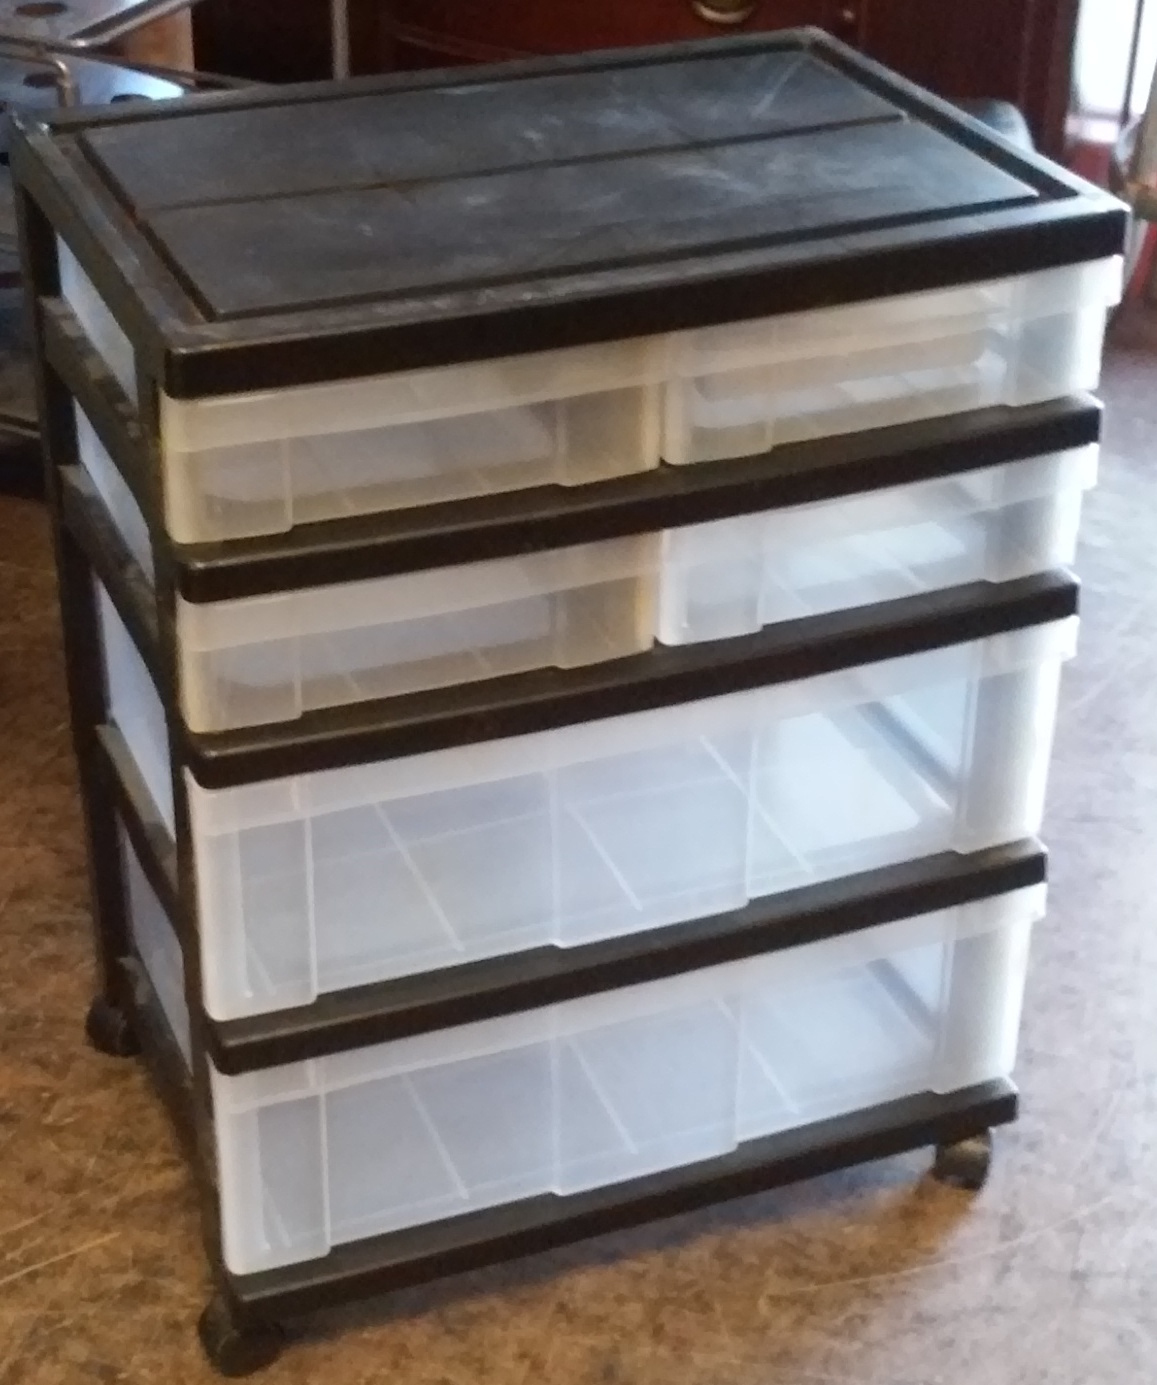 UHURU FURNITURE & COLLECTIBLES SOLD **REDUCED** 6Drawer